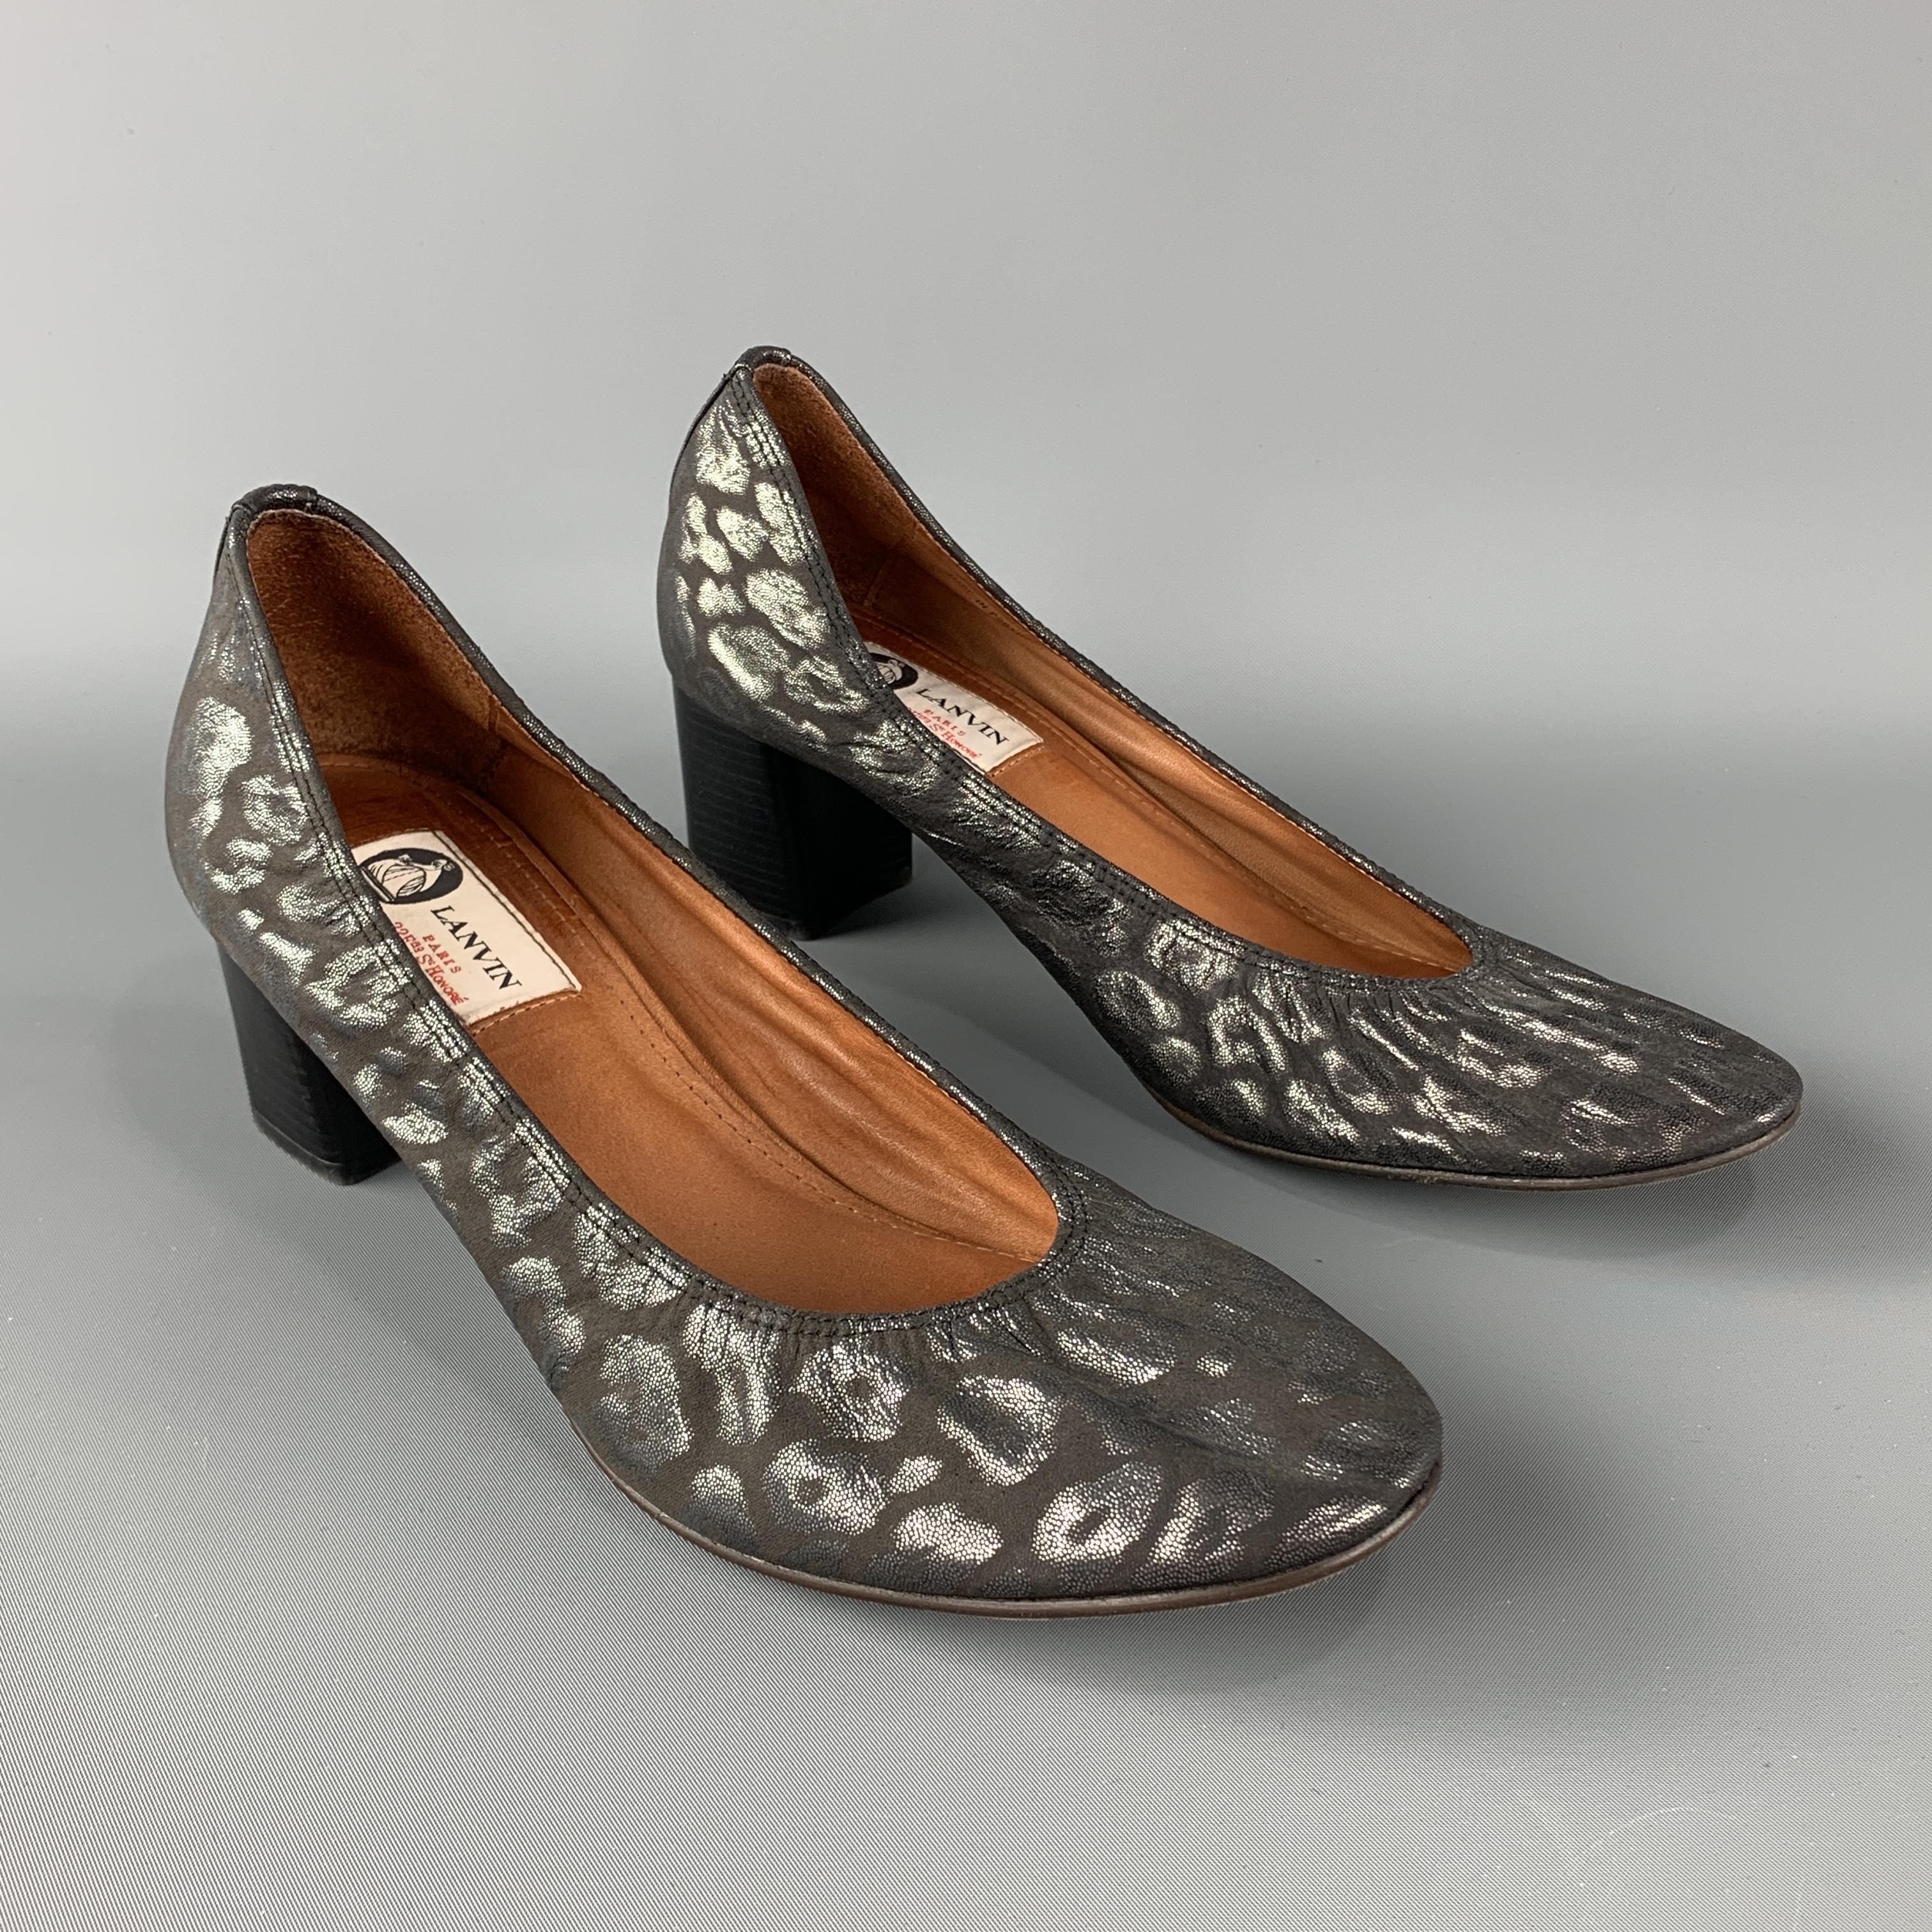 Vintage LANVIN Pumps comes in grey tones in an animal print  jacquard material, with a stacked heel. Made in Portugal.
 
Excellent Pre-Owned Condition.
Marked: IT 42
 
Measurements:
 
Heel: 2.2 in.